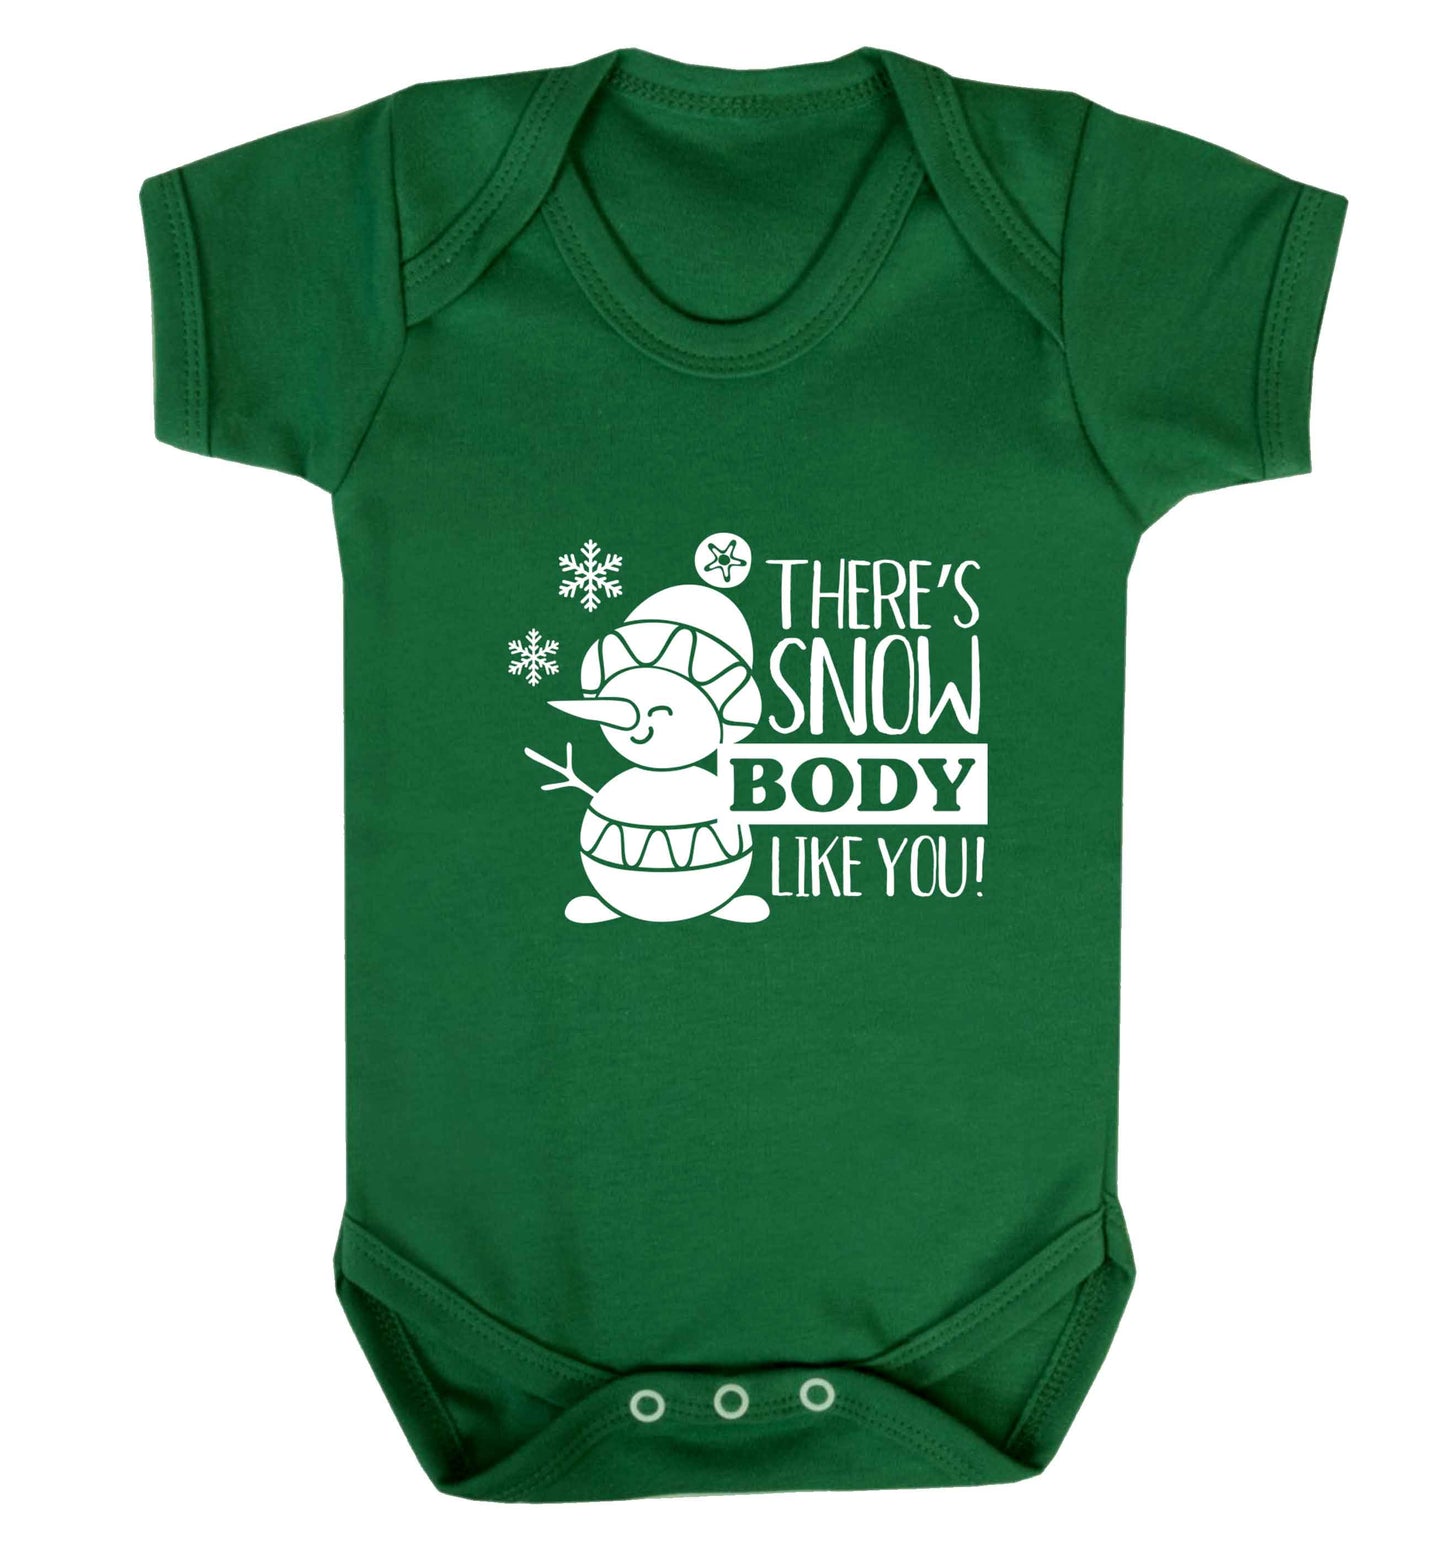 There's snow body like you baby vest green 18-24 months